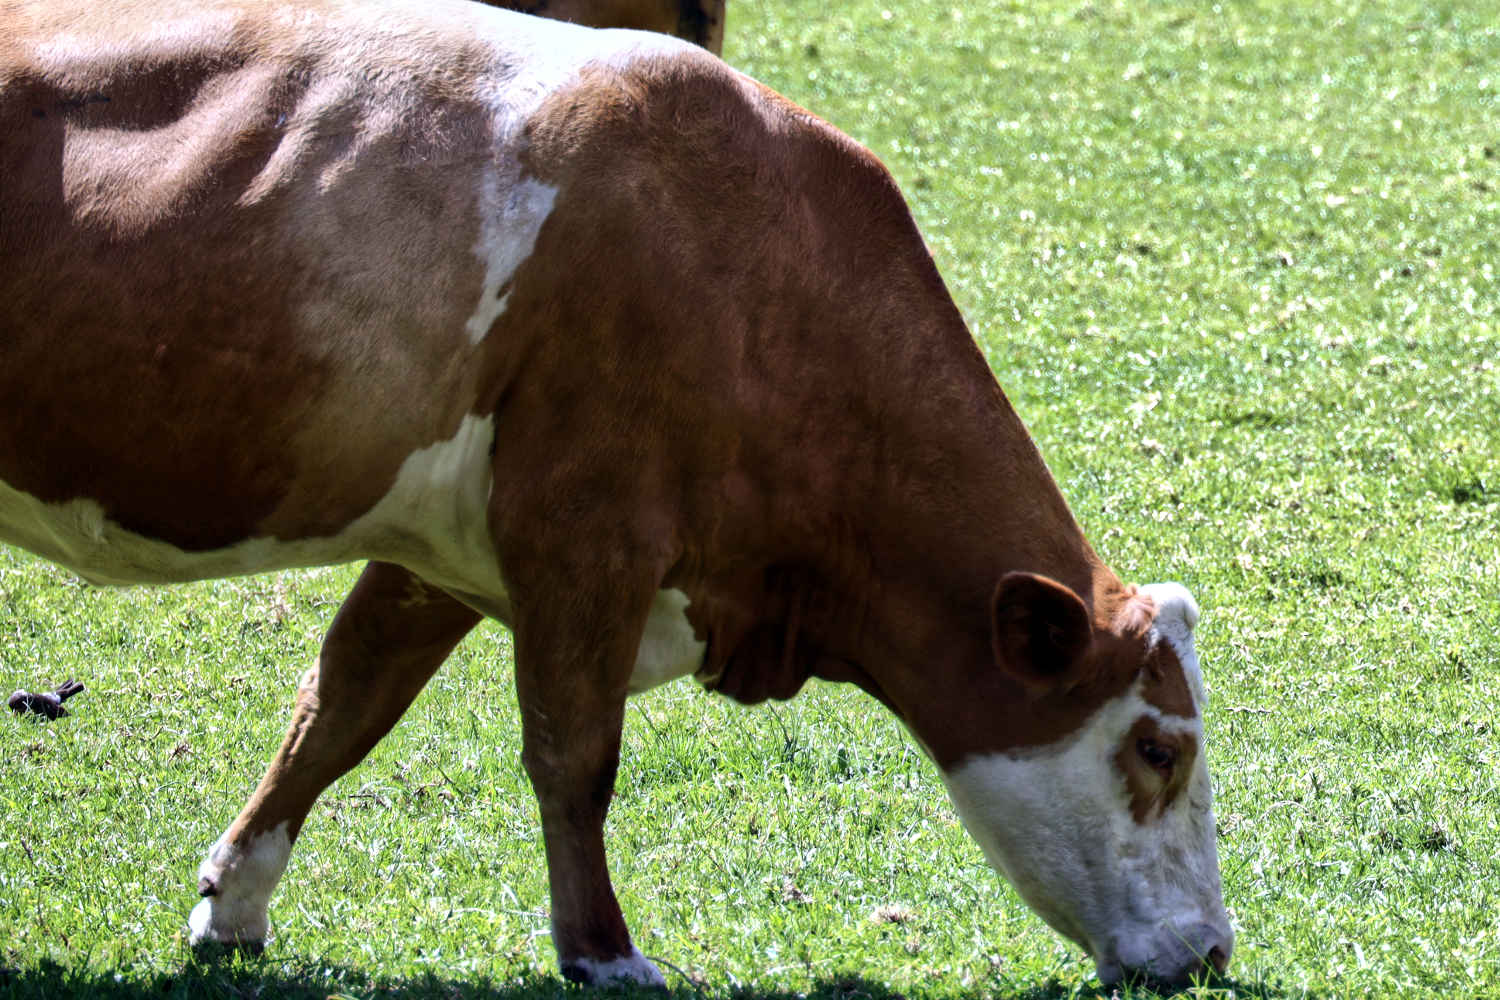 Cornwall Park dairy cow, Auckland New Zealand